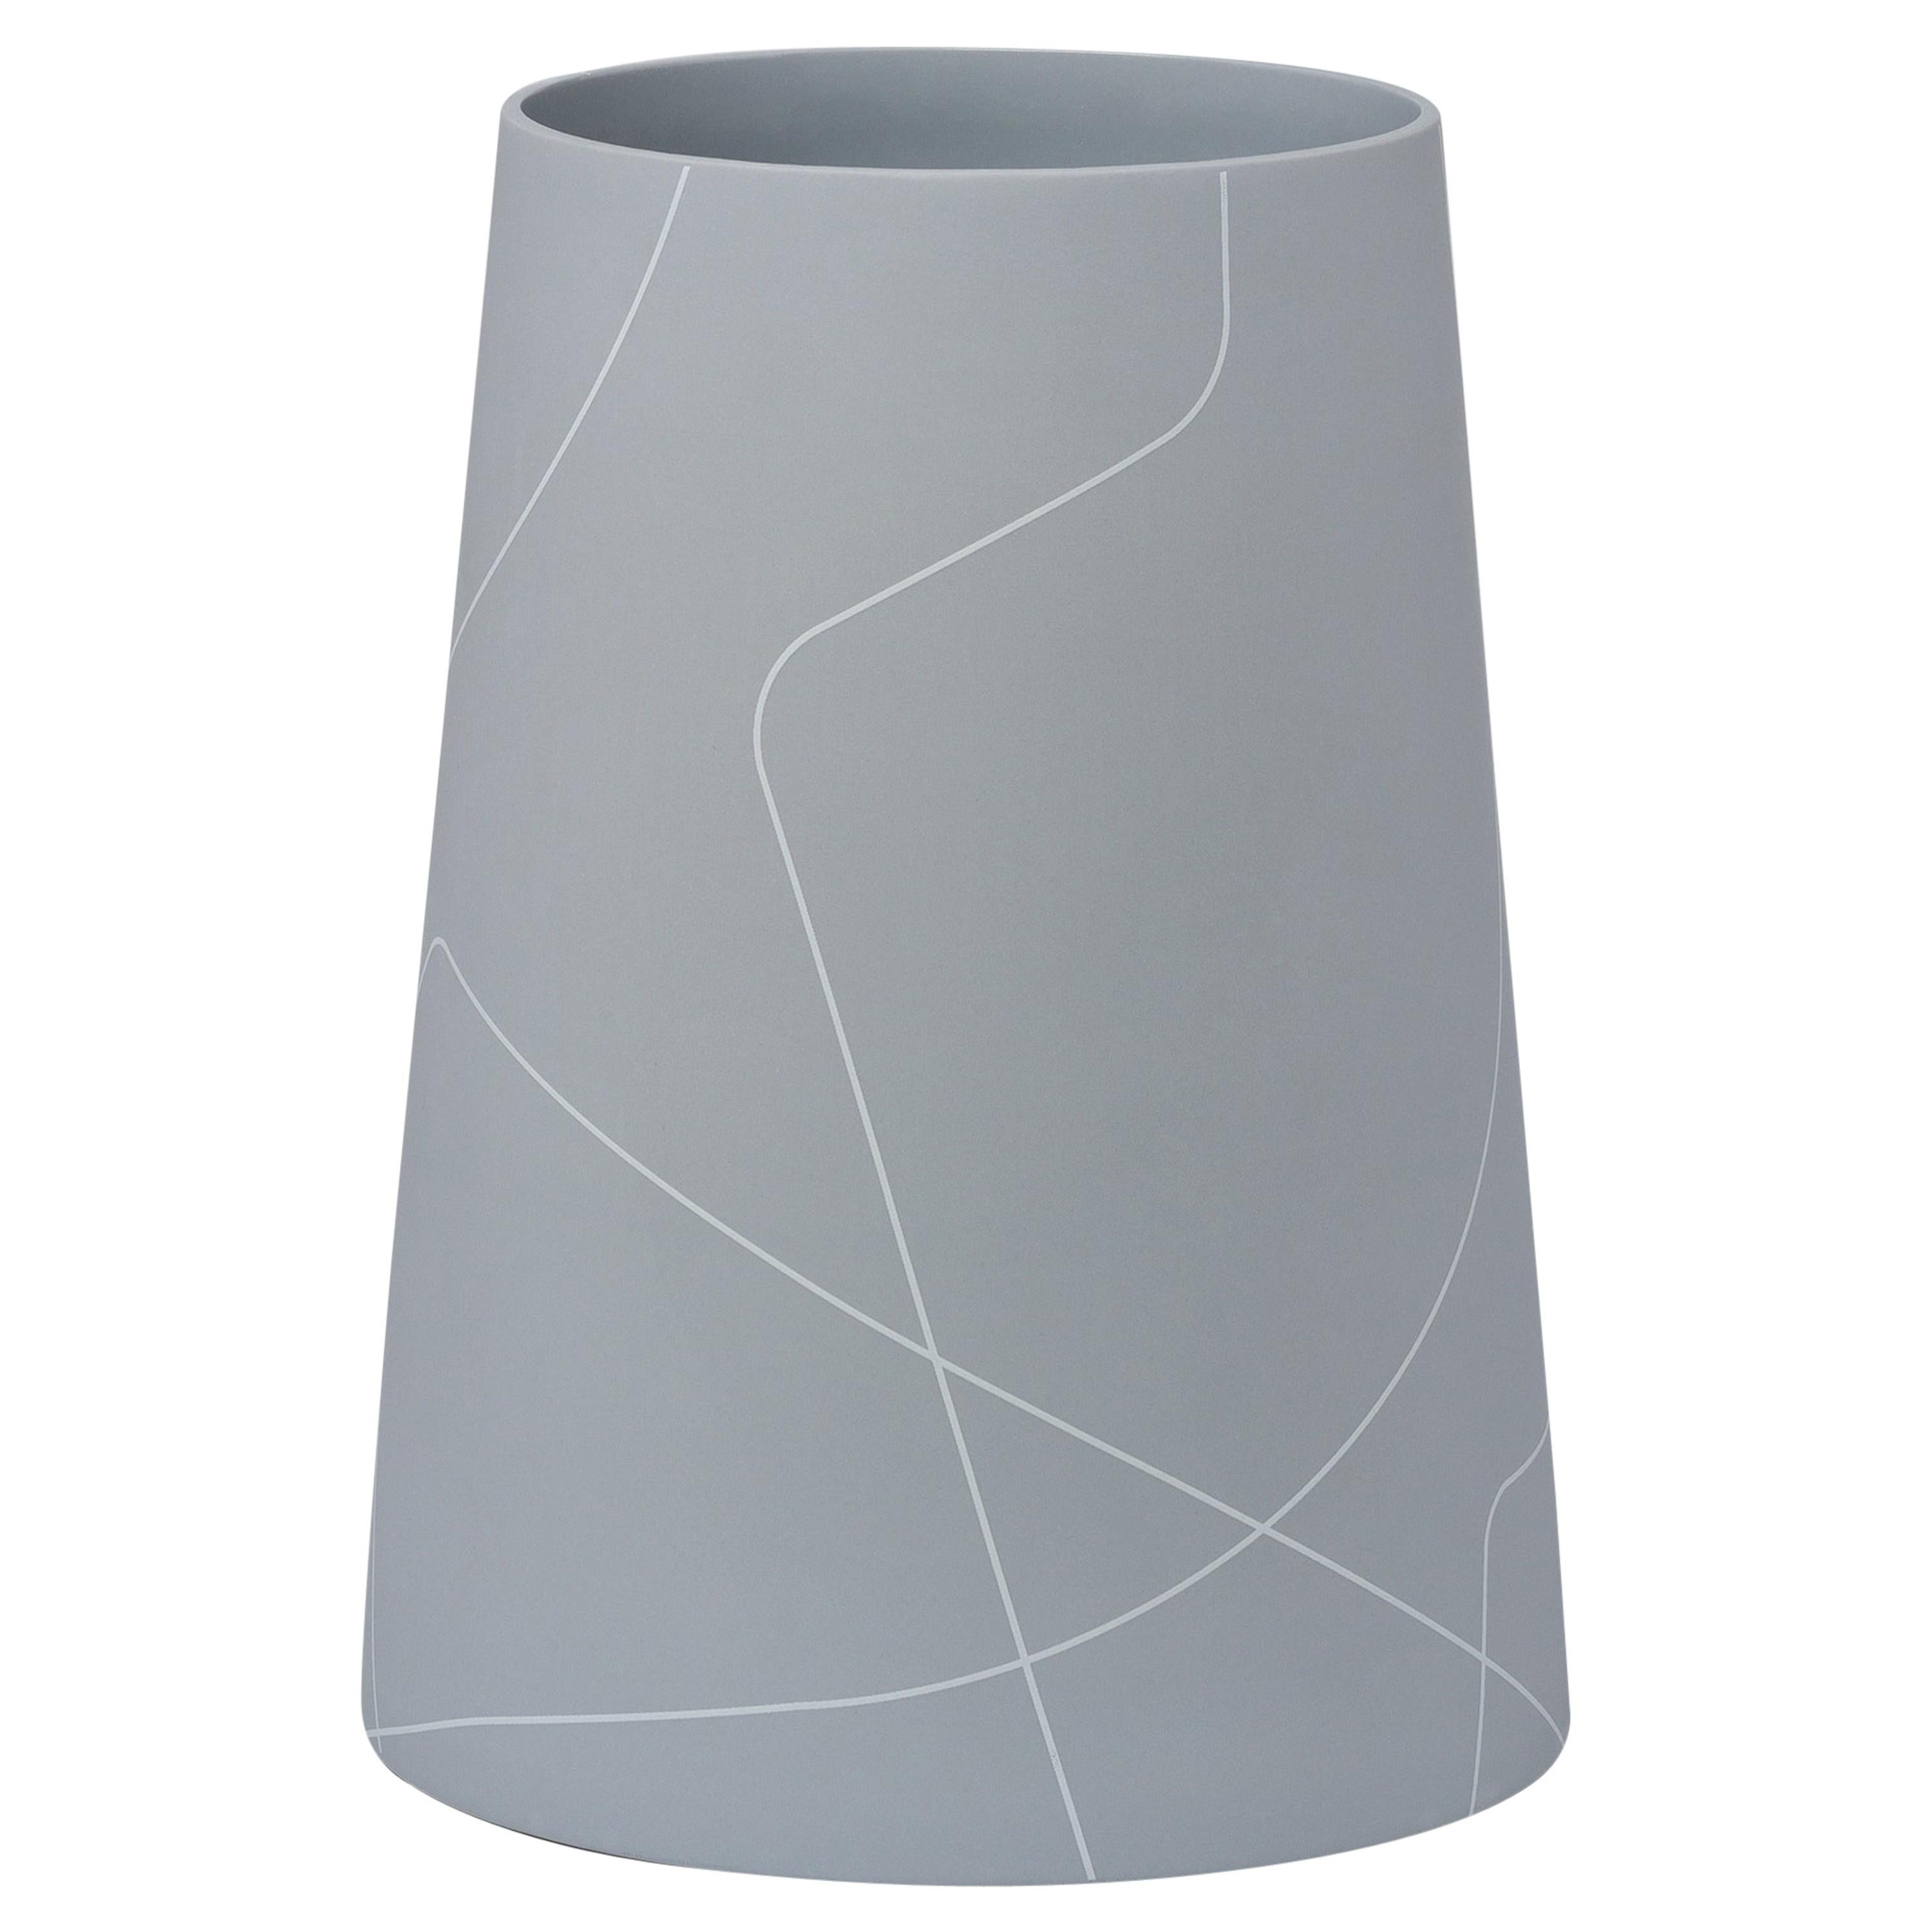 Tall Medium Grey Conical Ceramic Vase with Graphic Line Pattern